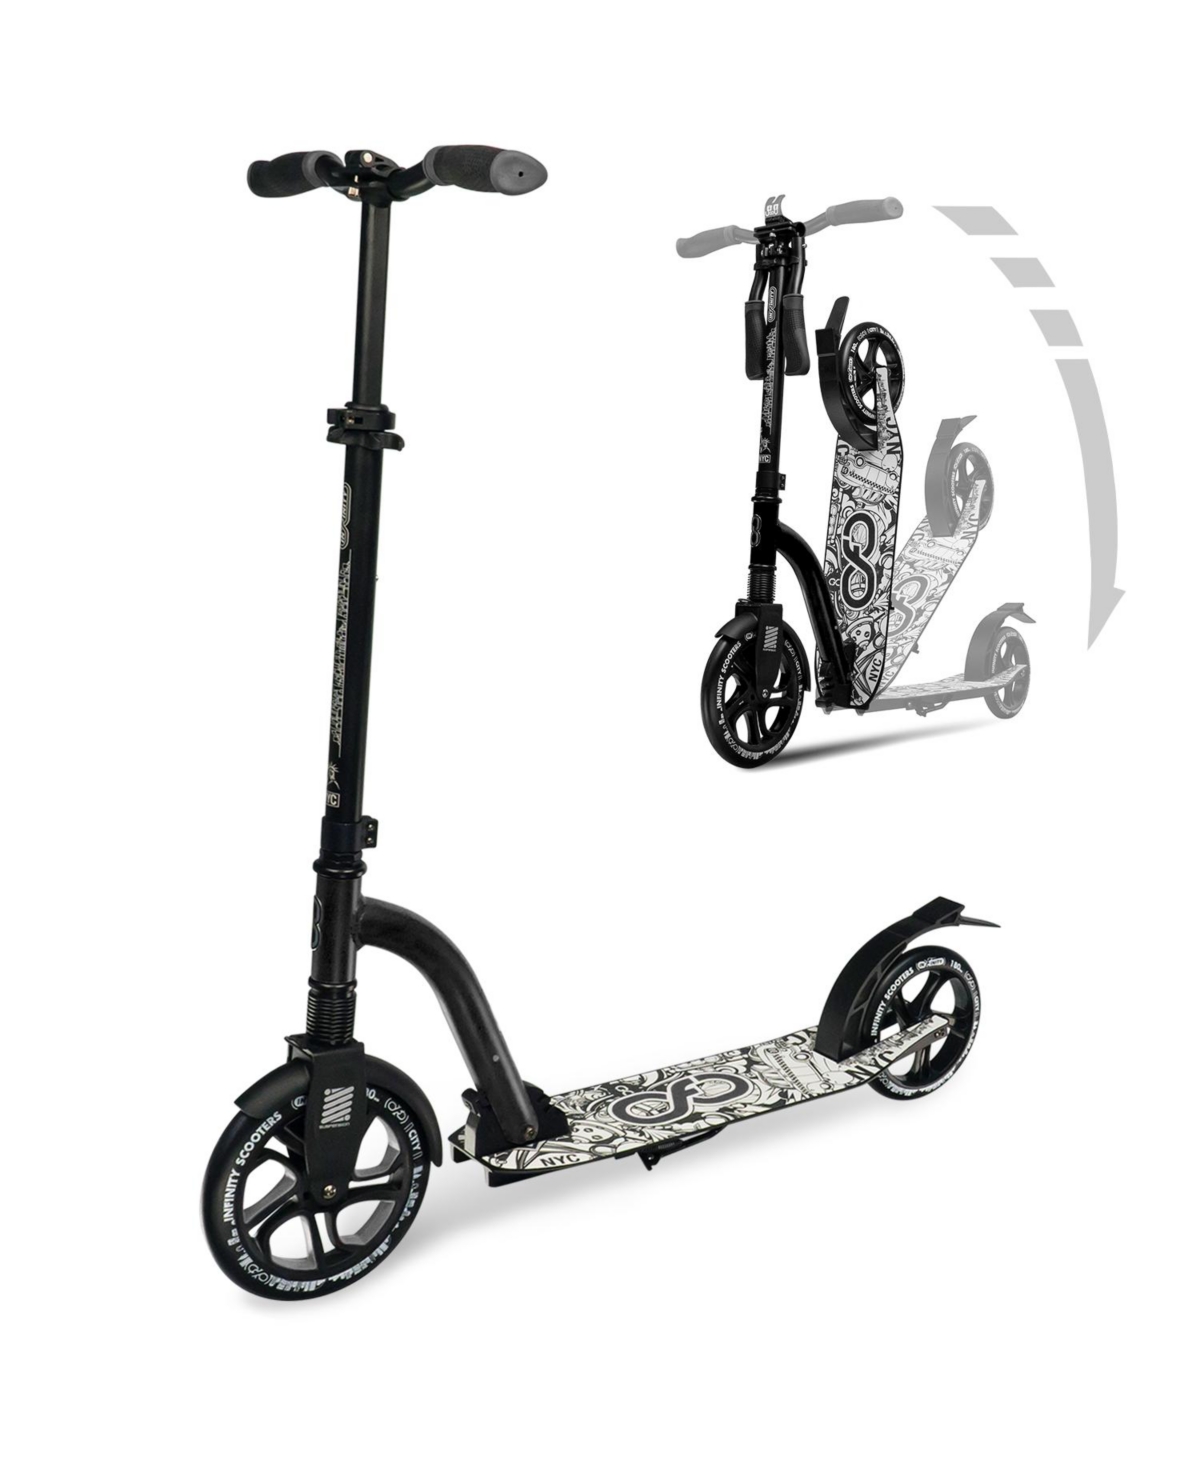 New York Foldable Kick Scooter - Great Scooters For Teens And Adults - Black